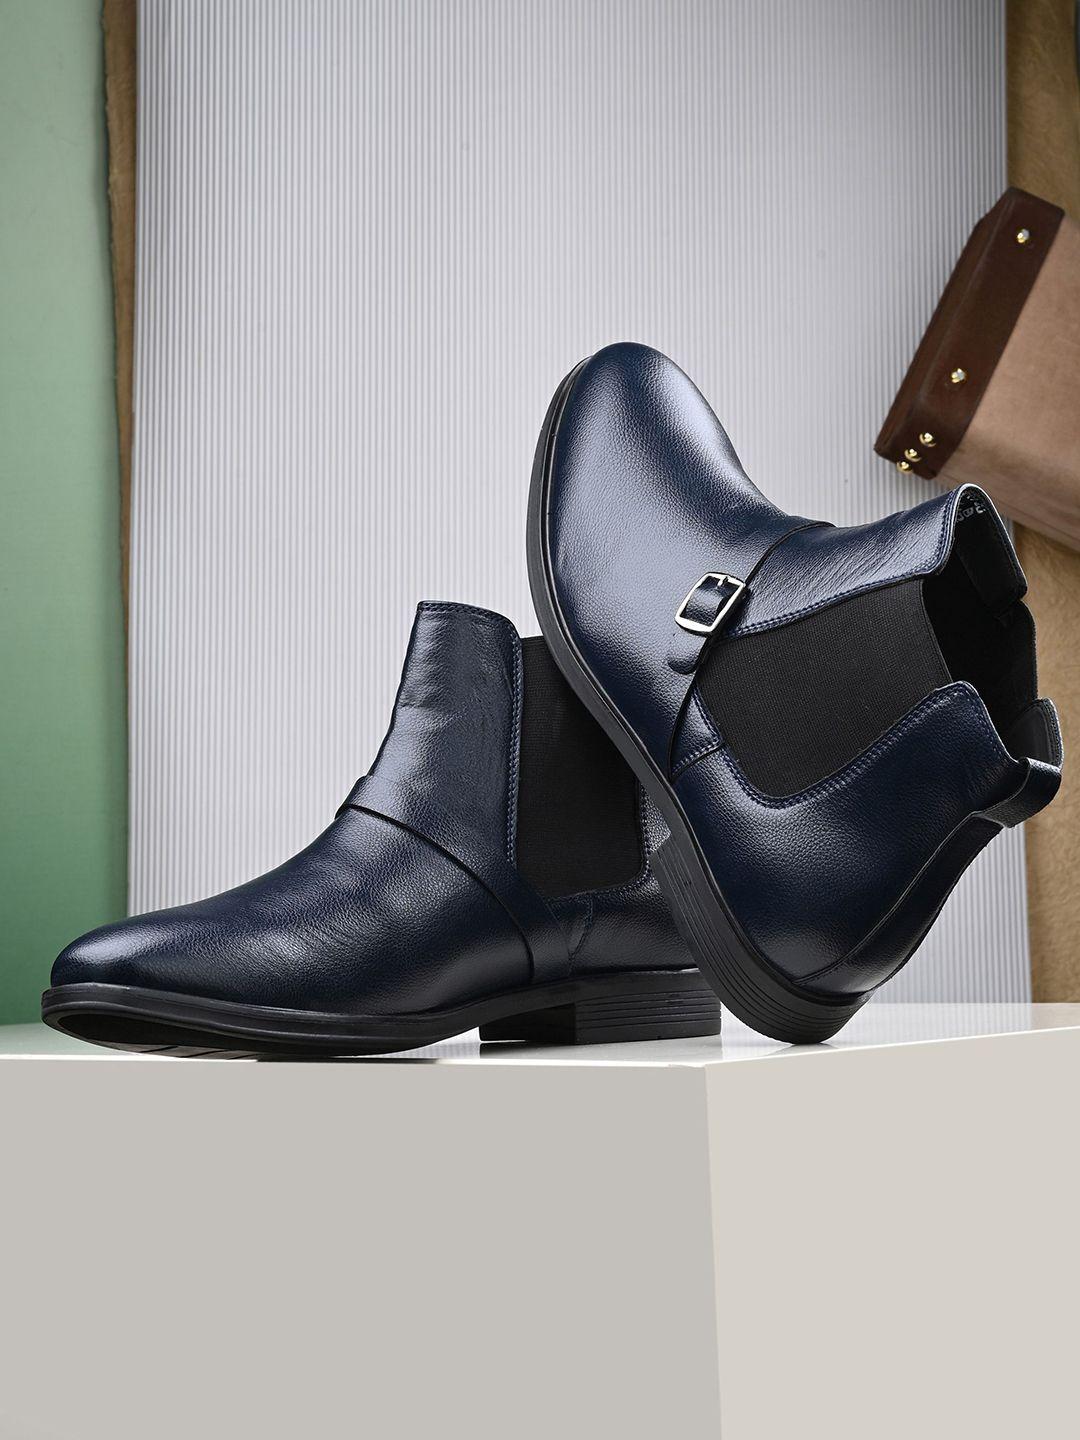 the-roadster-lifestyle-co.-men-navy-blue-mid-top-block-heel-chelsea-boots-with-buckle